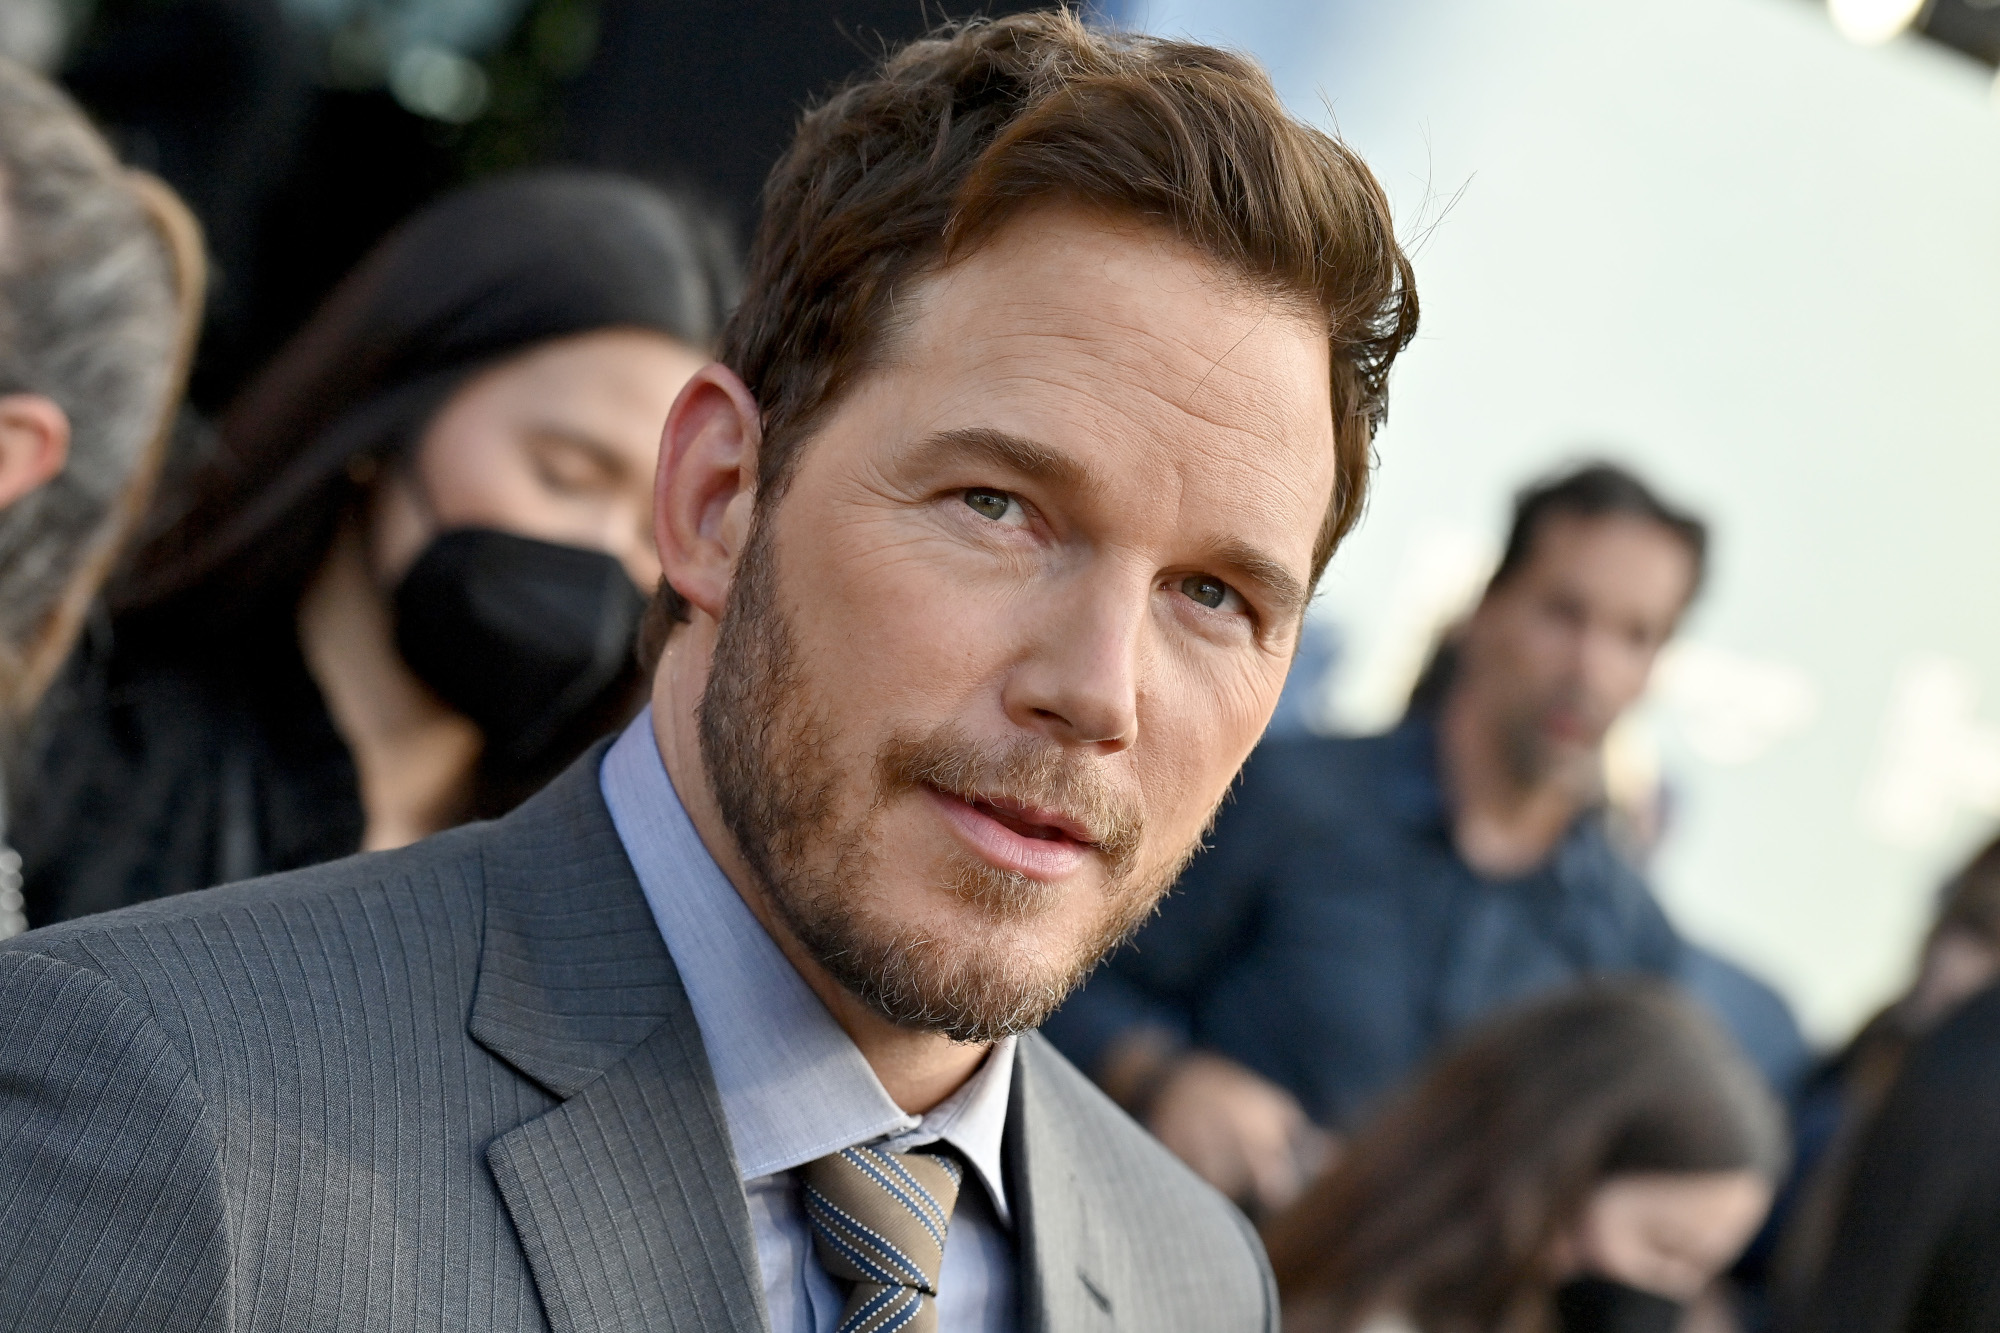 Chris Pratt, who will voice Mario in the upcoming 'Super Mario Bros.' adaptation. He's wearing a light blue shirt and gray suit.